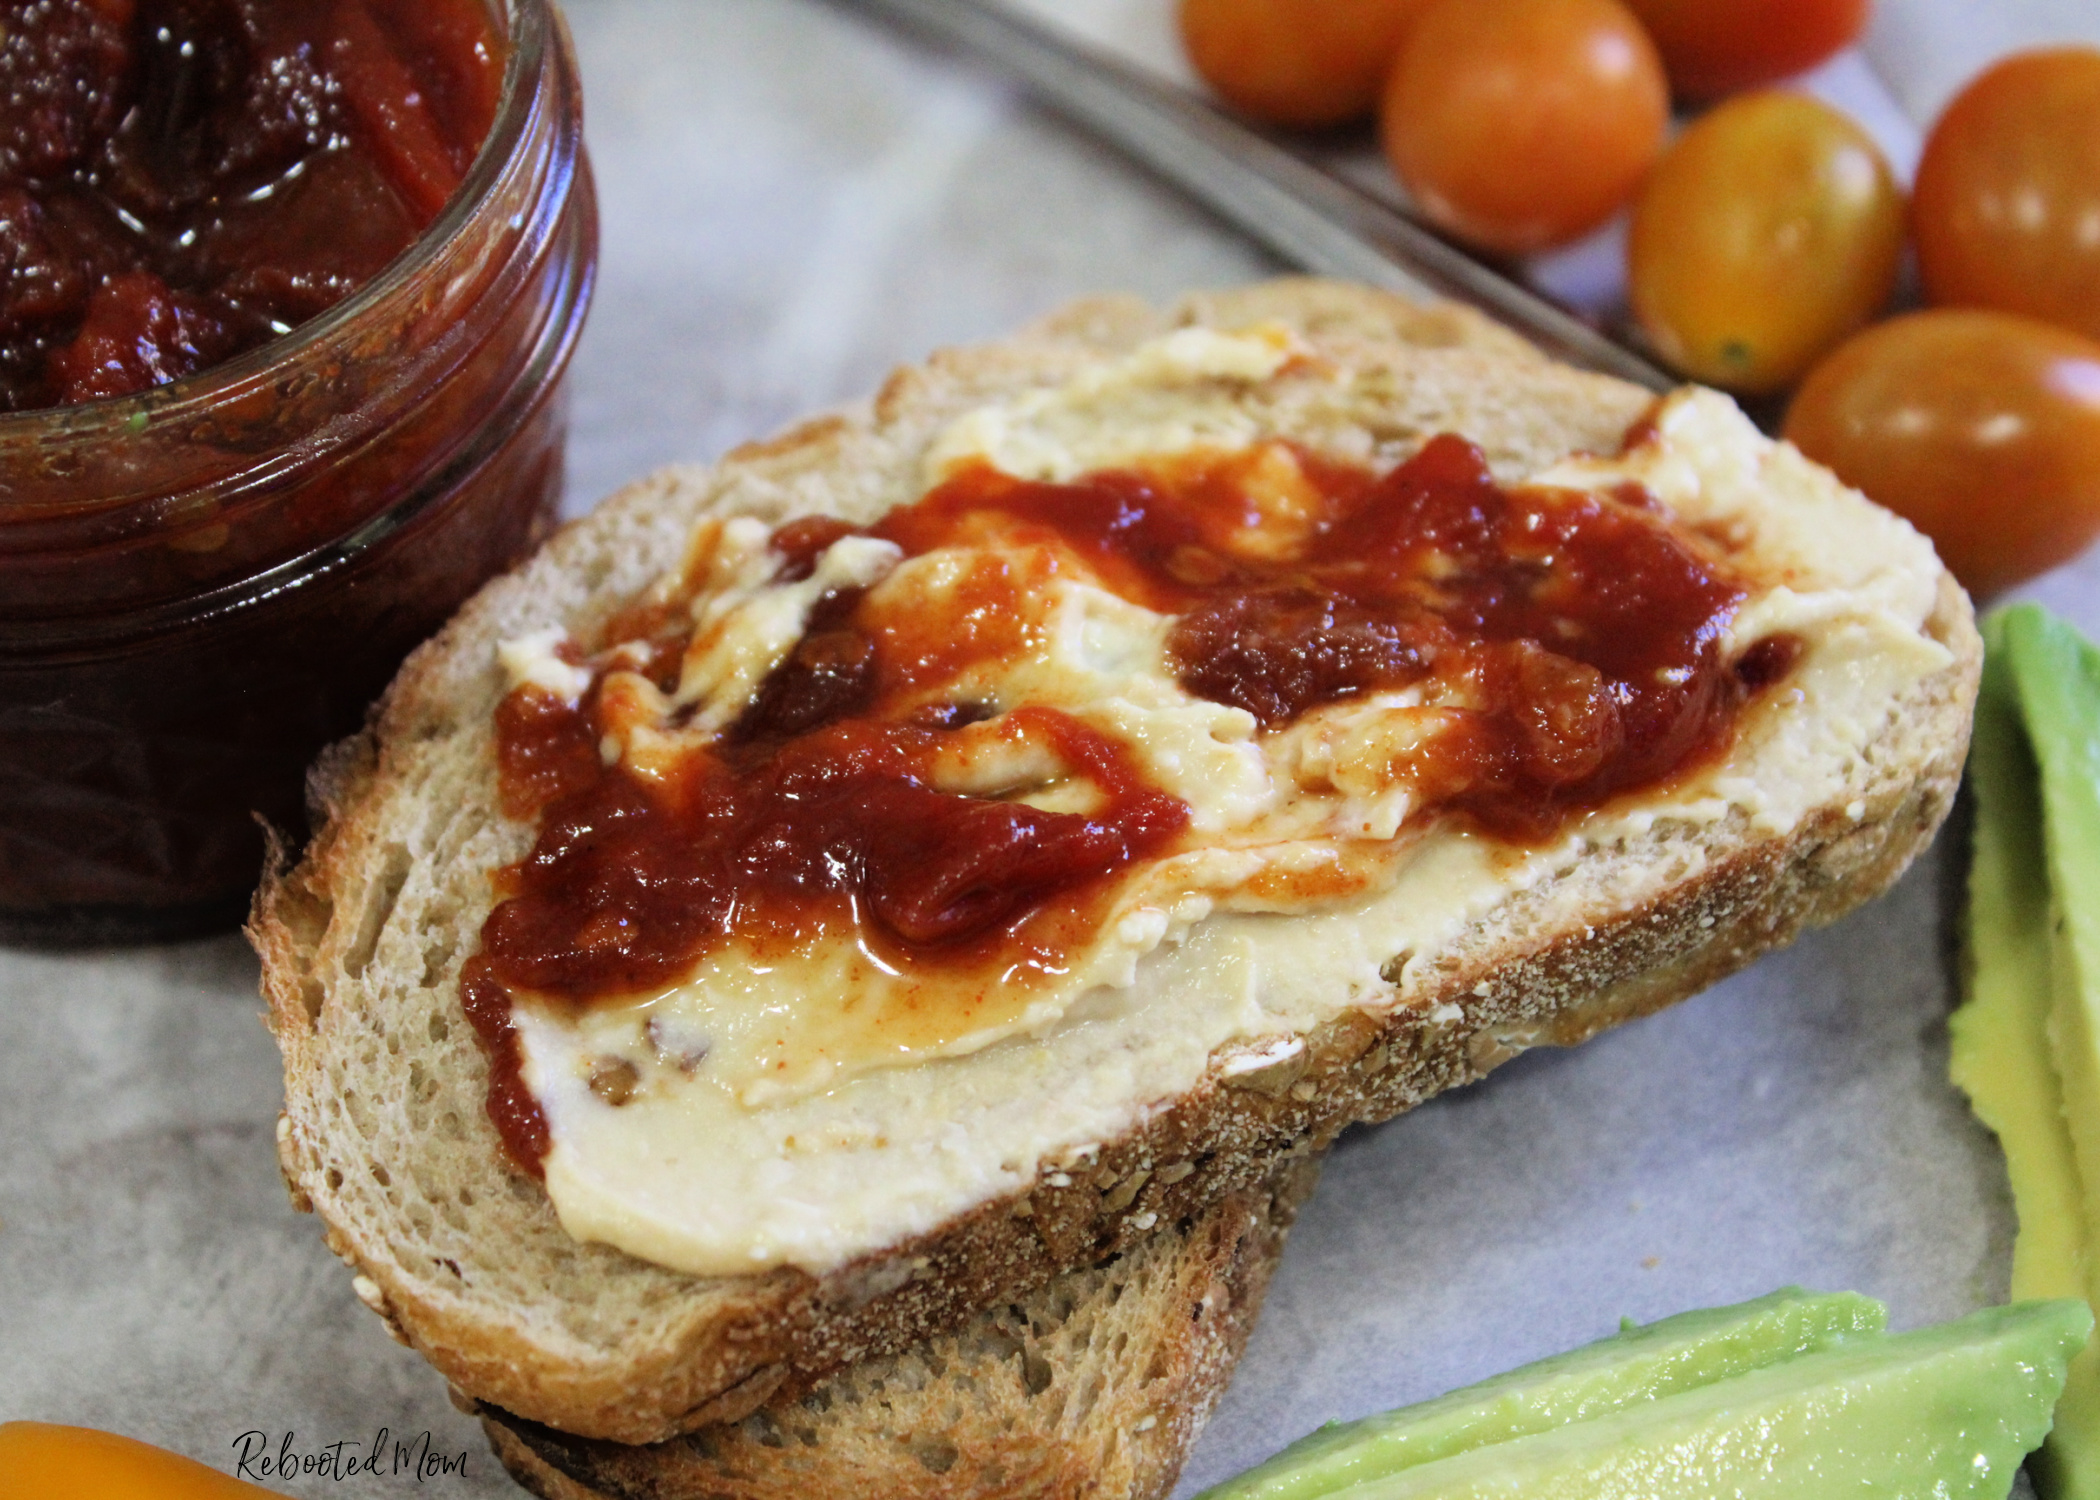 This Chipotle Tomato Jam combines the smoky flavor of chipotle chiles with garden fresh tomatoes for a jam that's unique and flavorful and perfect on toasted sourdough!